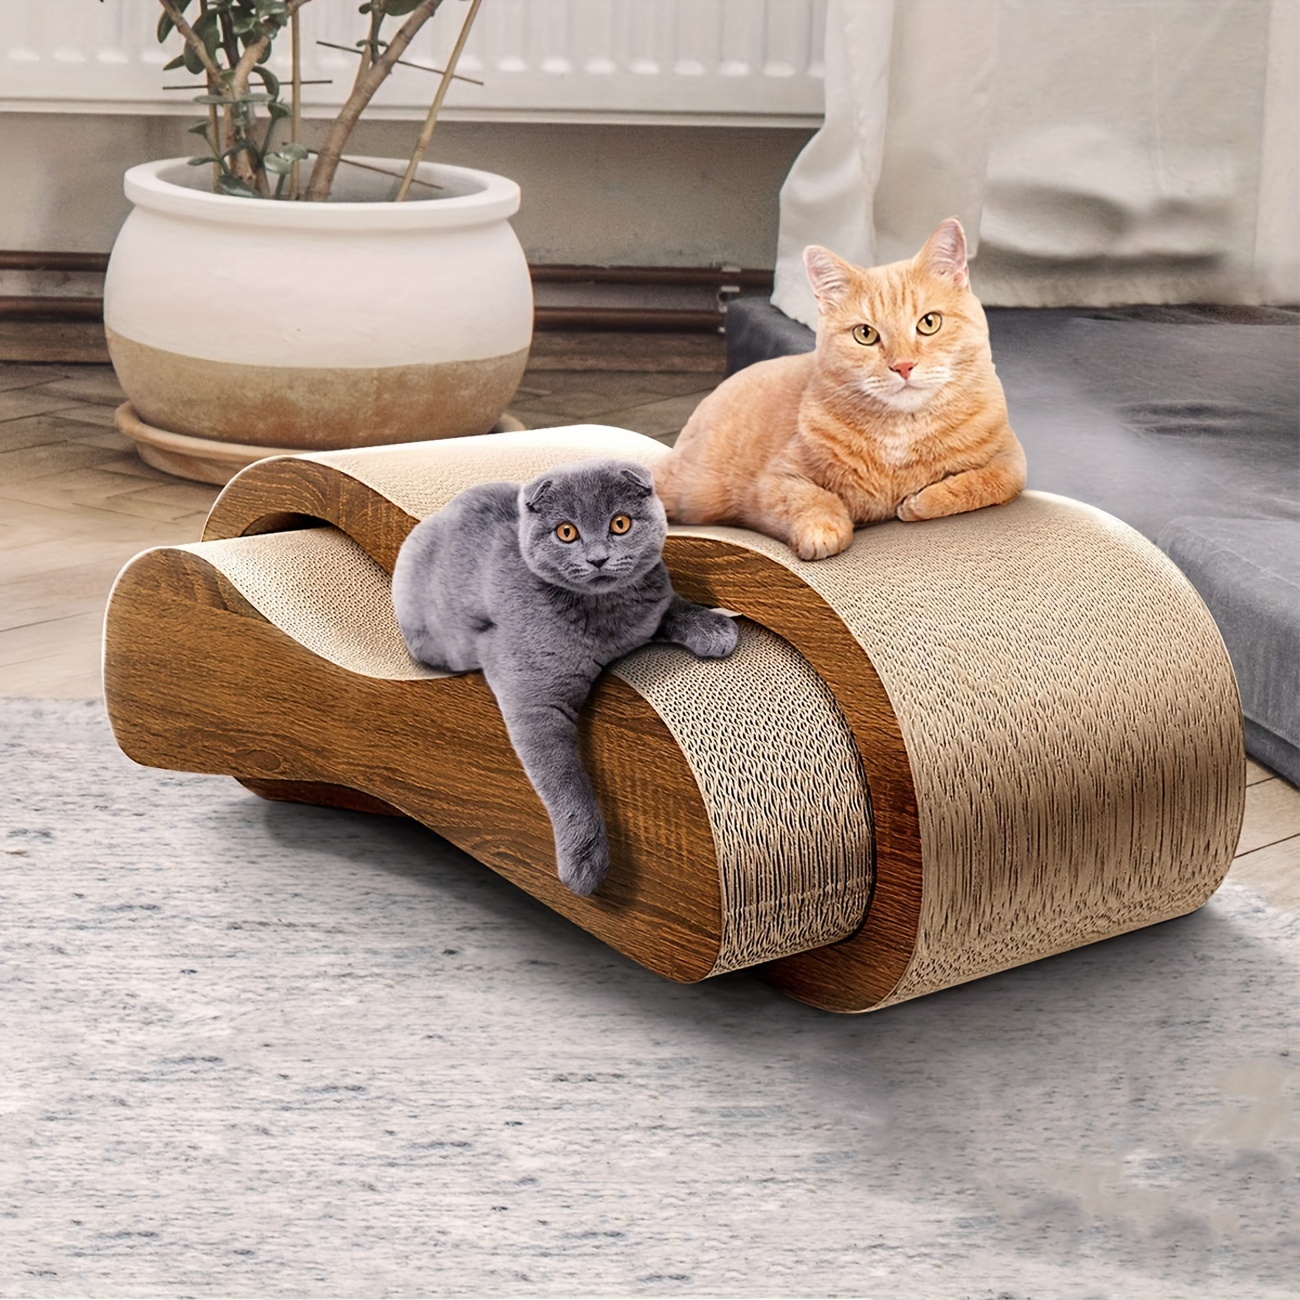 

Extra-large 2-in-1 Cat Scratcher & Lounge Bed - Durable Corrugated Cardboard, Protects Furniture & Claws